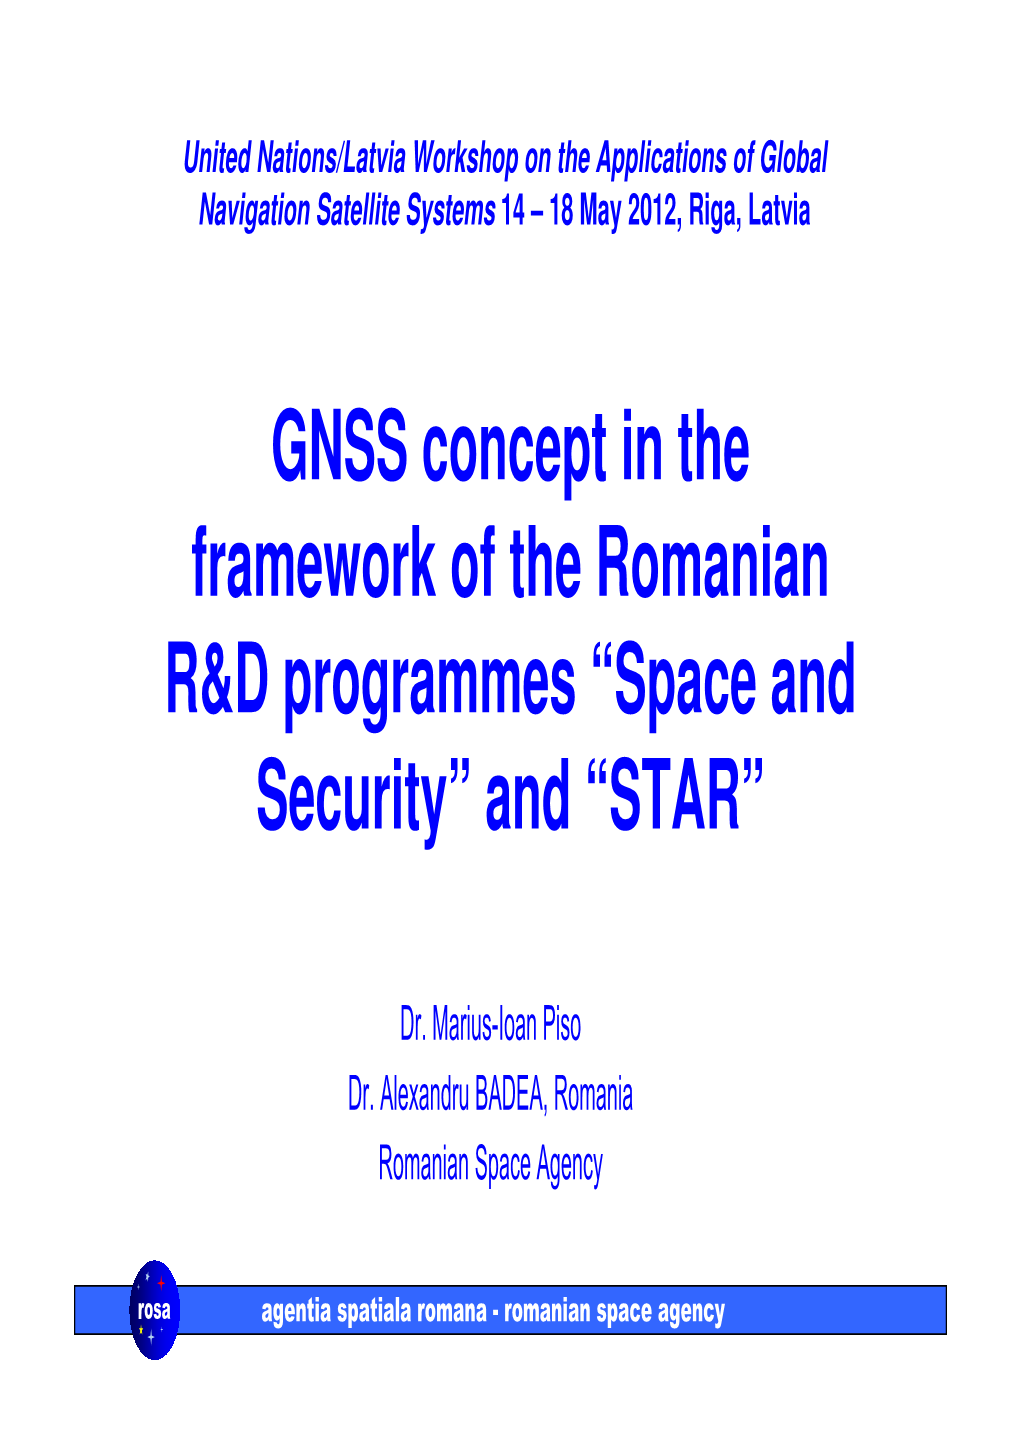 GNSS Concept in the Framework of the Romanian R&D Programmes “Space and Security” and “STAR”